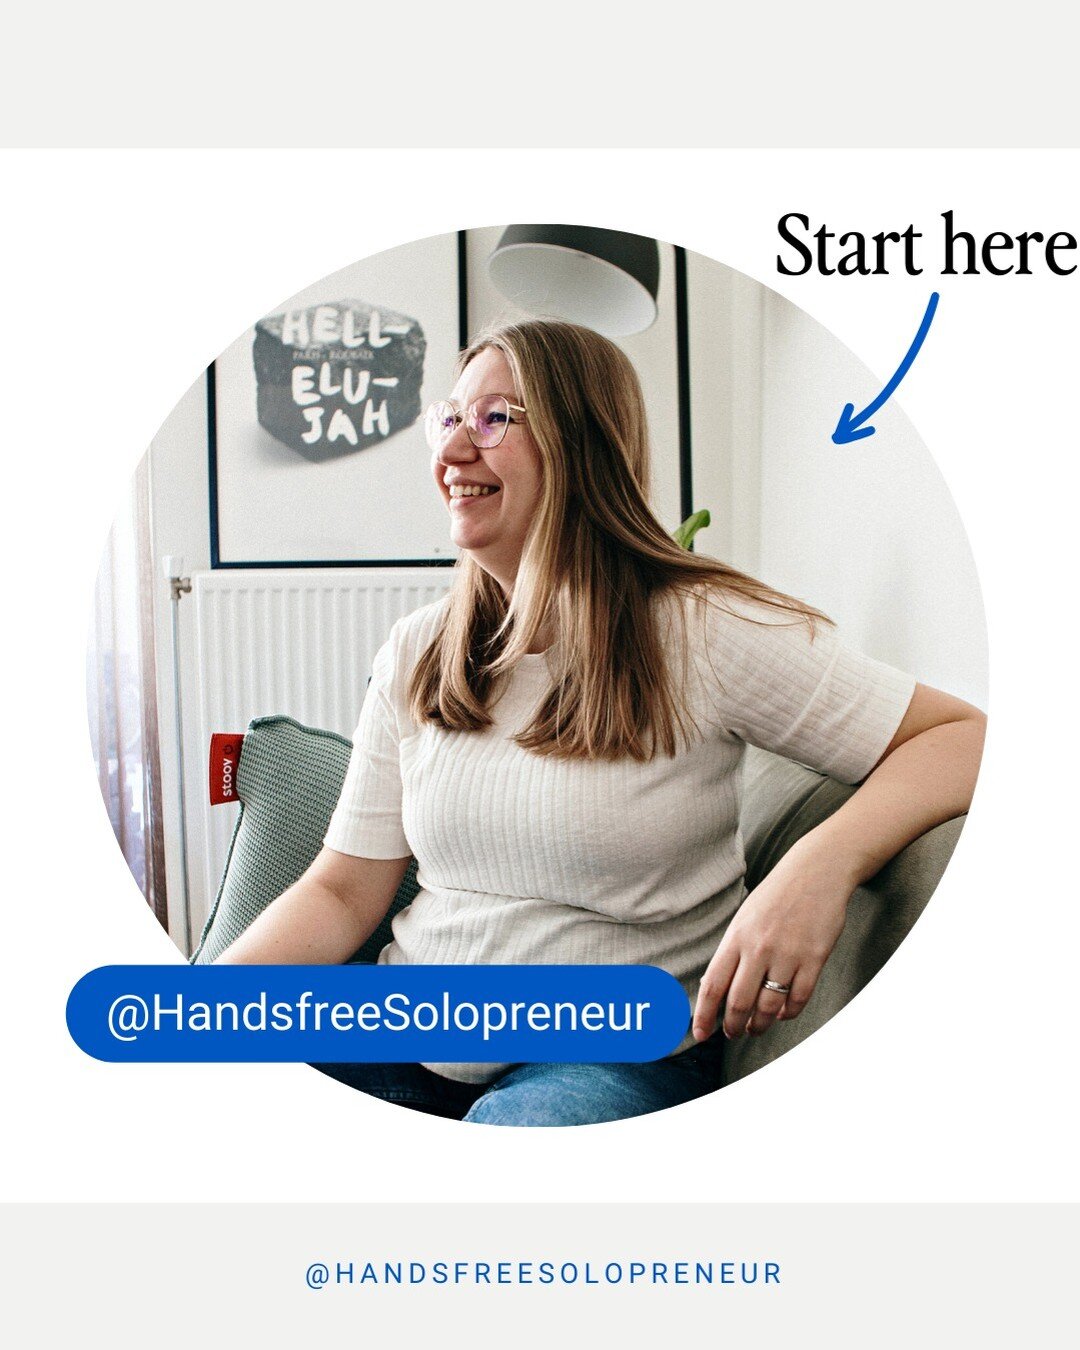 👋Hiya, I'm Marjolein! Welcome to Handsfree Solopreneur, where I help overworked online solopreneurs, simplify and automate their business systems.

My goal is to help you Implement simplified processes and automations that take care of your client e